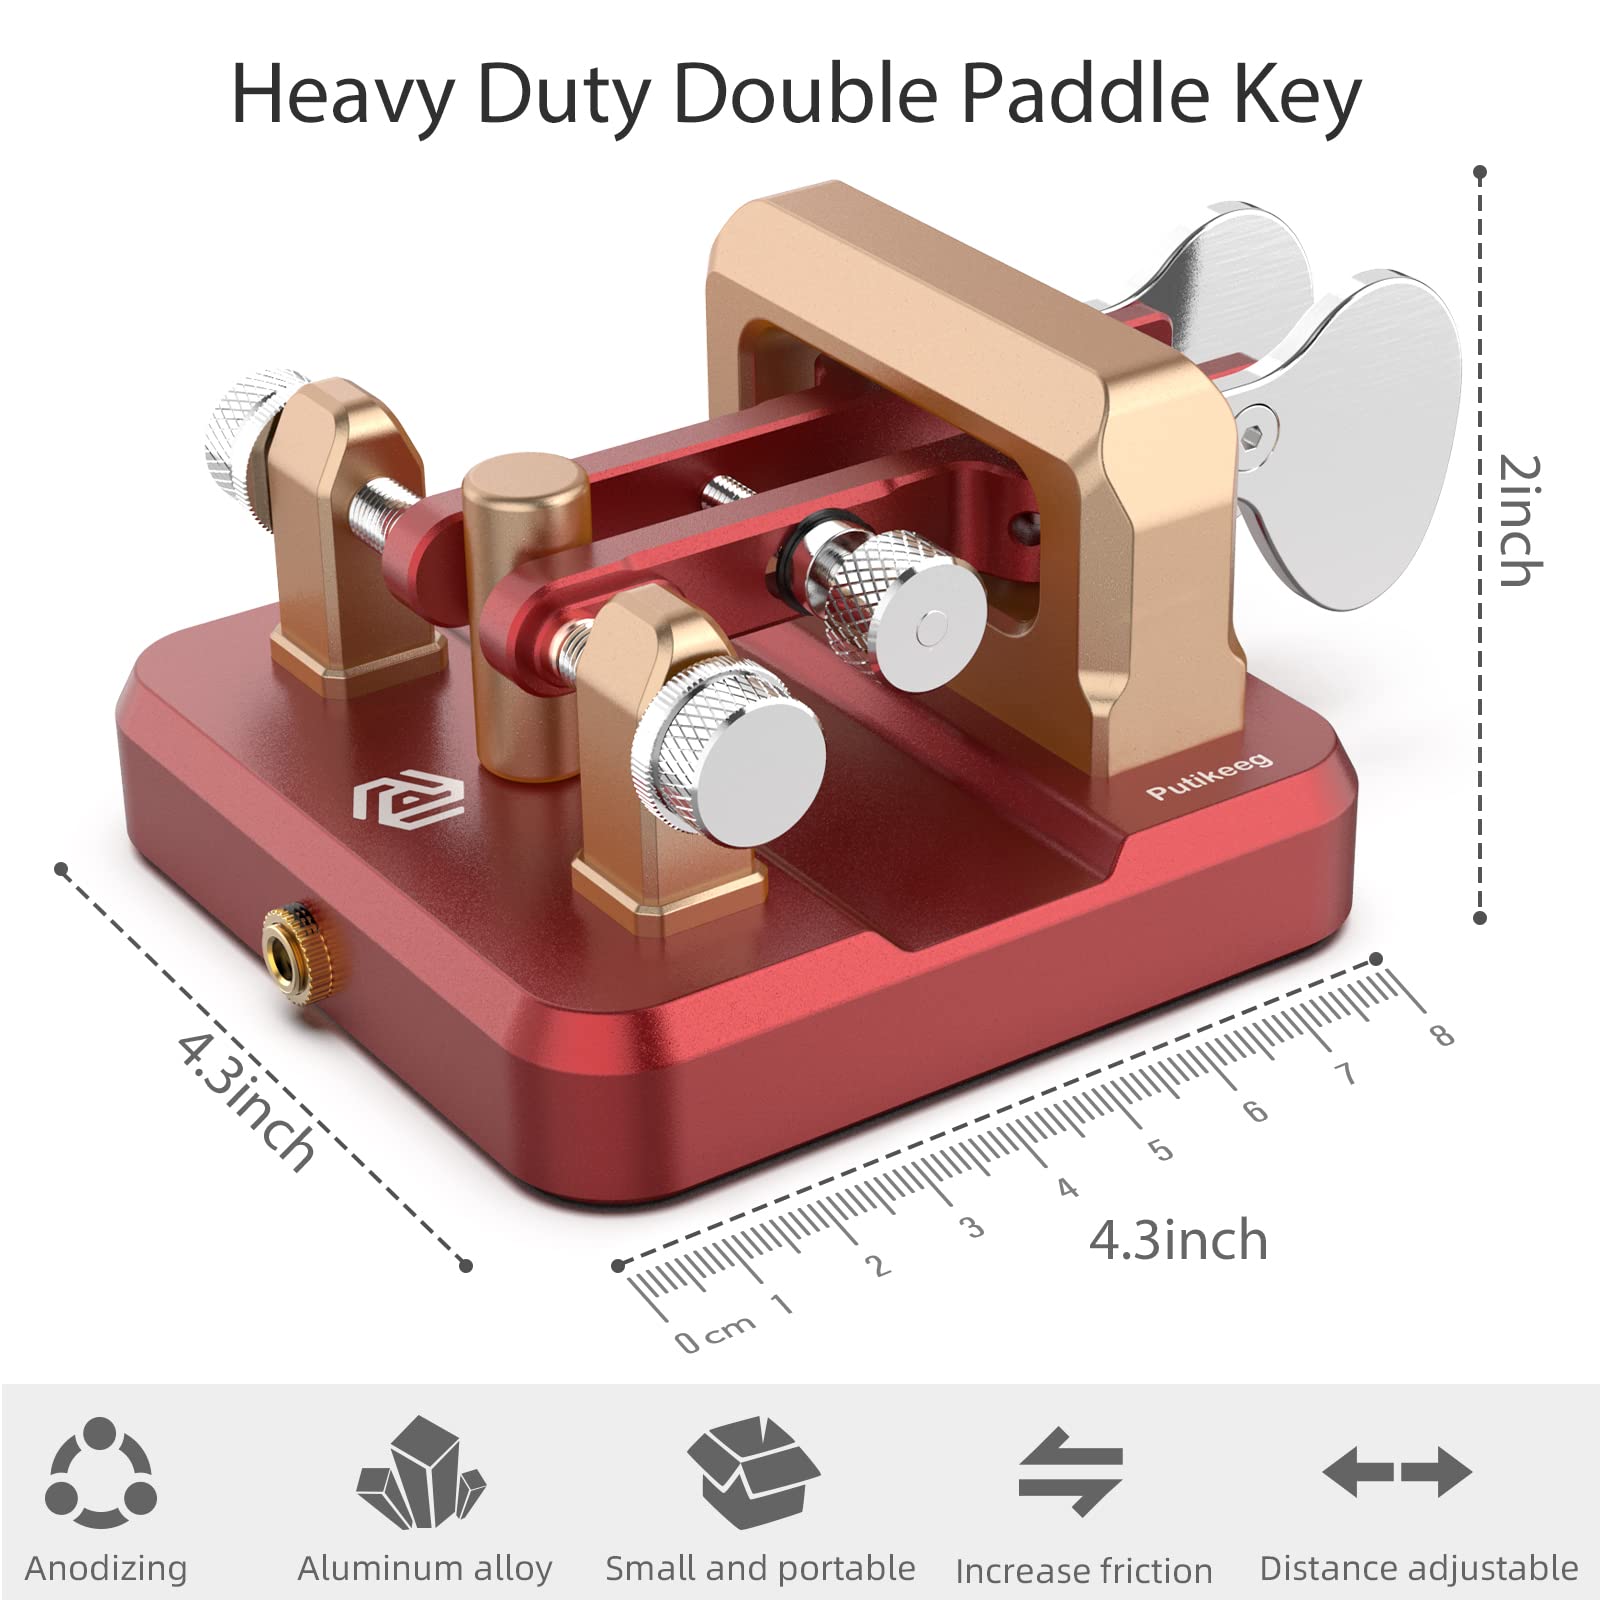 This is a red CW Keyer Automatic Double Paddle Constructed from durable 6061T6 aluminum alloy, it features four professional-grade bearings and a magnetic return force for precise and comfortable operation. The compact design includes a base with four magnetic magnets for secure attachment to metal surfaces, ensuring stable operation even in outdoor settings. Adjustable paddle distance allows for customization, while a 3.5mm standard stereo jack enables compatibility with various short-wave radios